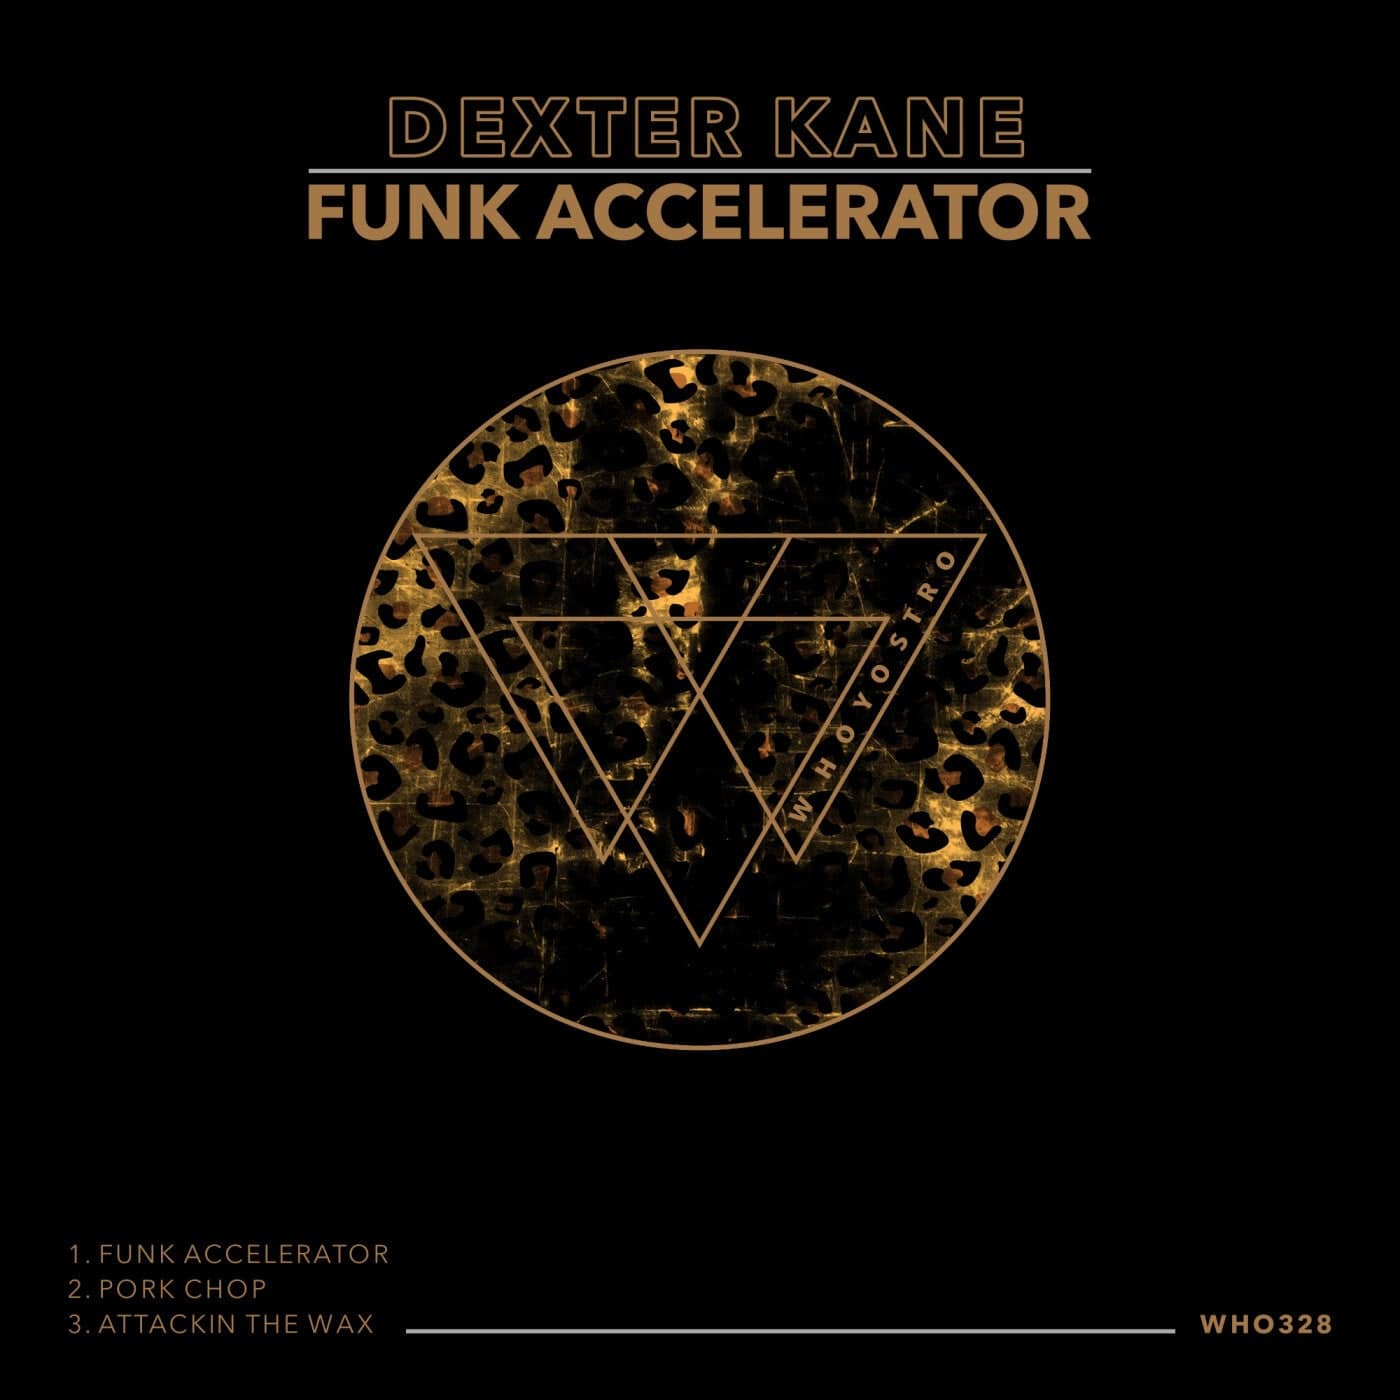 image cover: Dexter Kane - Funk Accelerator / WHO328